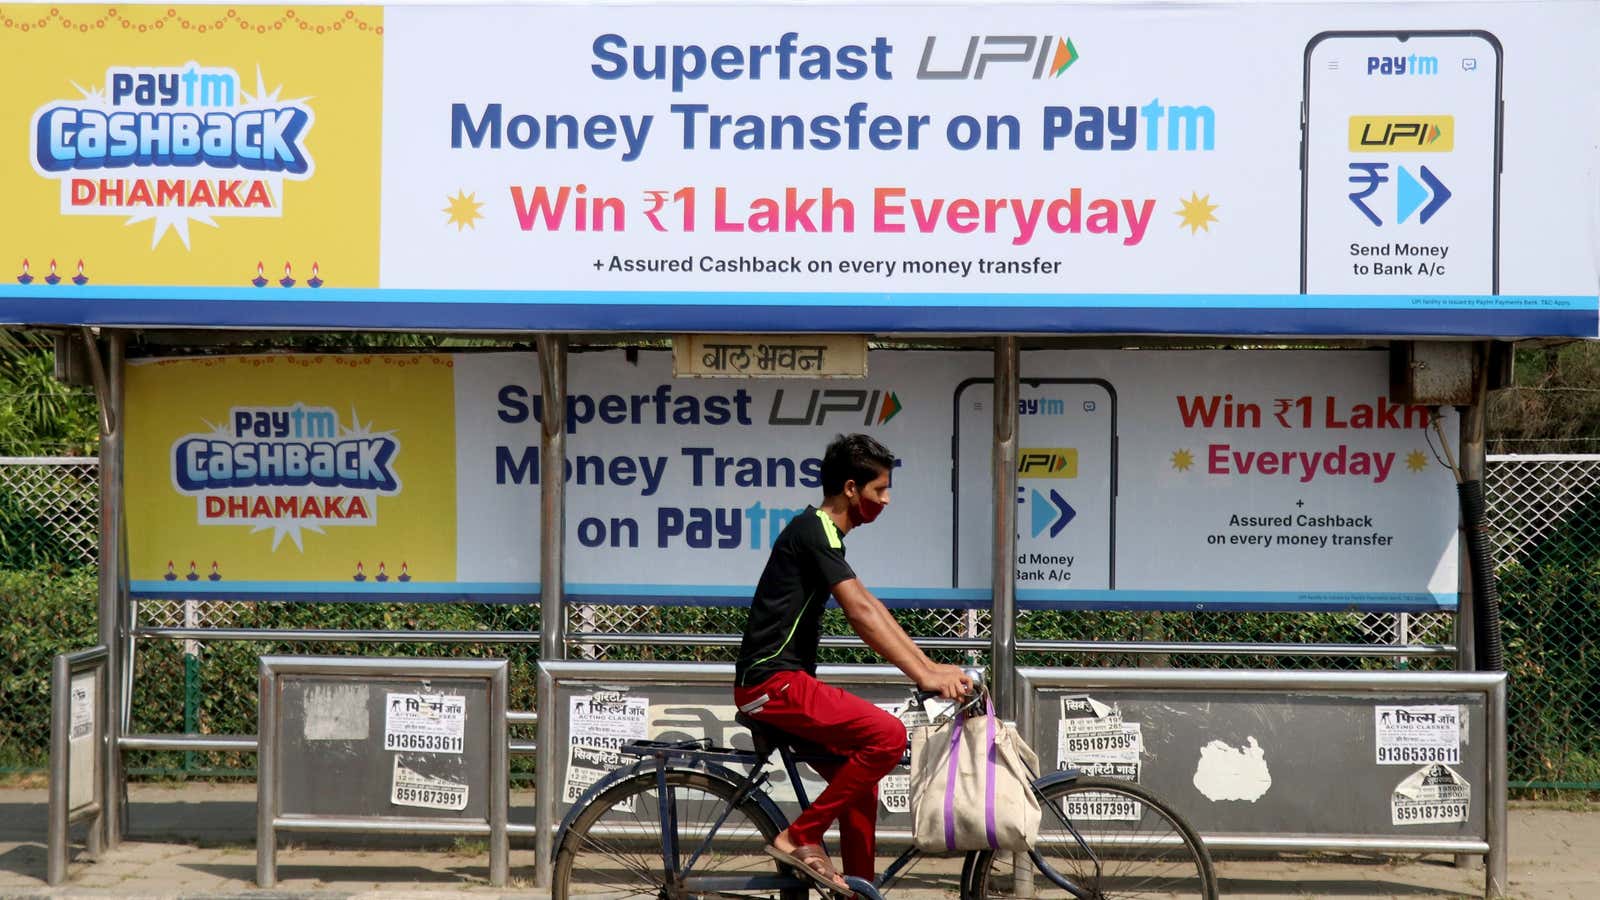 A man rides a bicycle past a bus stop with Paytm advertisements in Mumbai, India, November 10, 2021.